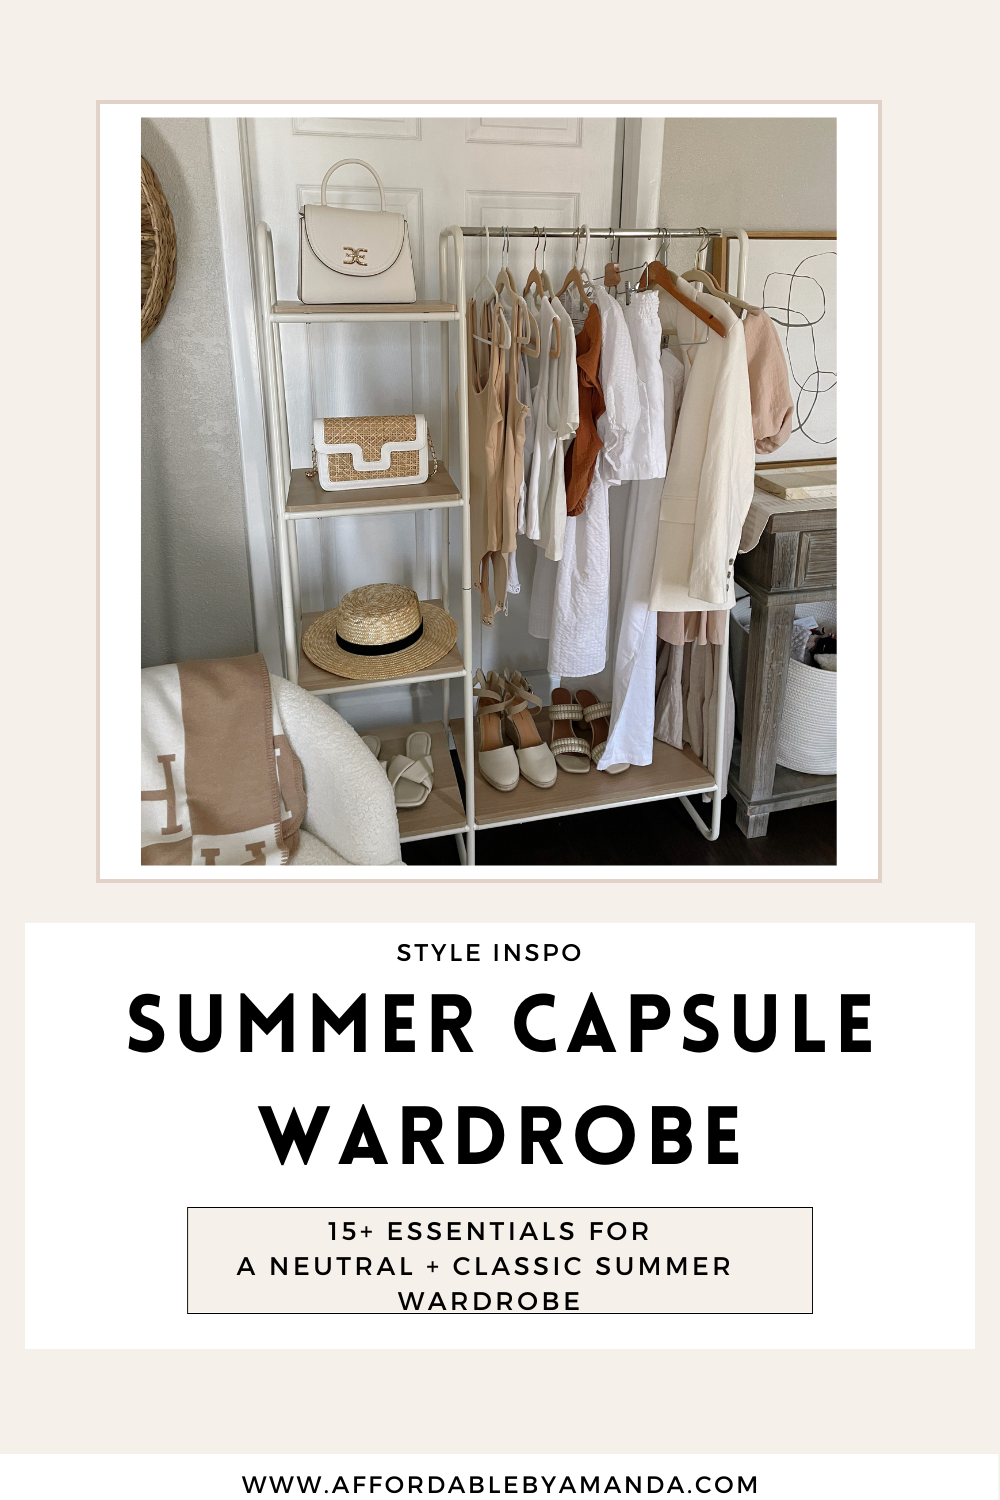 5 days ago — Learn how to create a perfect summer capsule wardrobe with this effortless summer capsule wardrobe checklist & chic outfit ideas for 2023!